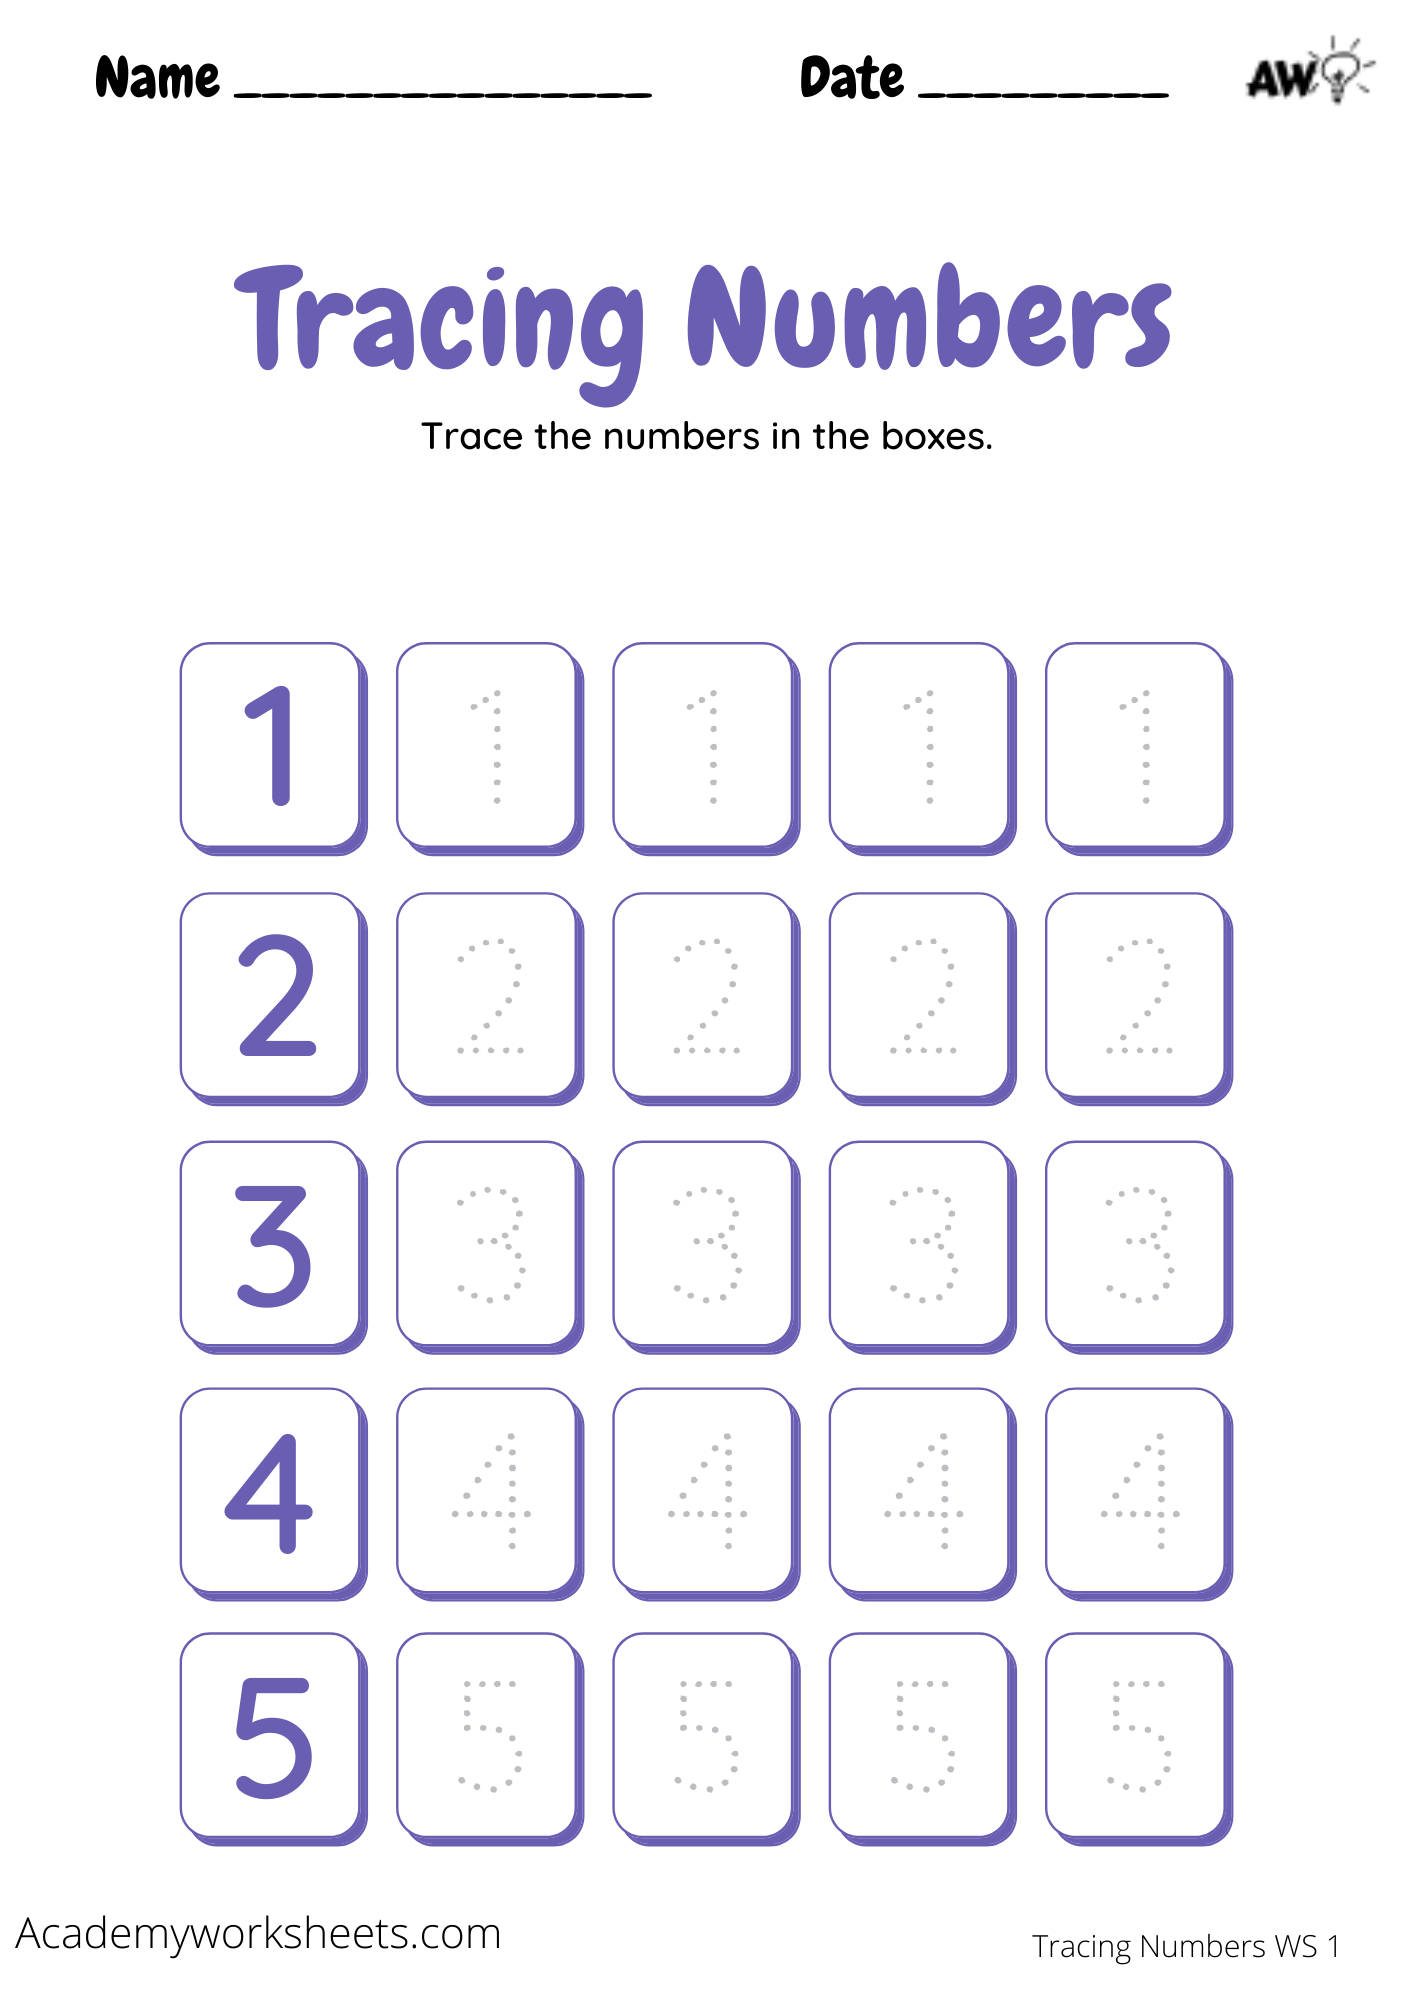 tracing-numbers-1-5-academy-worksheets